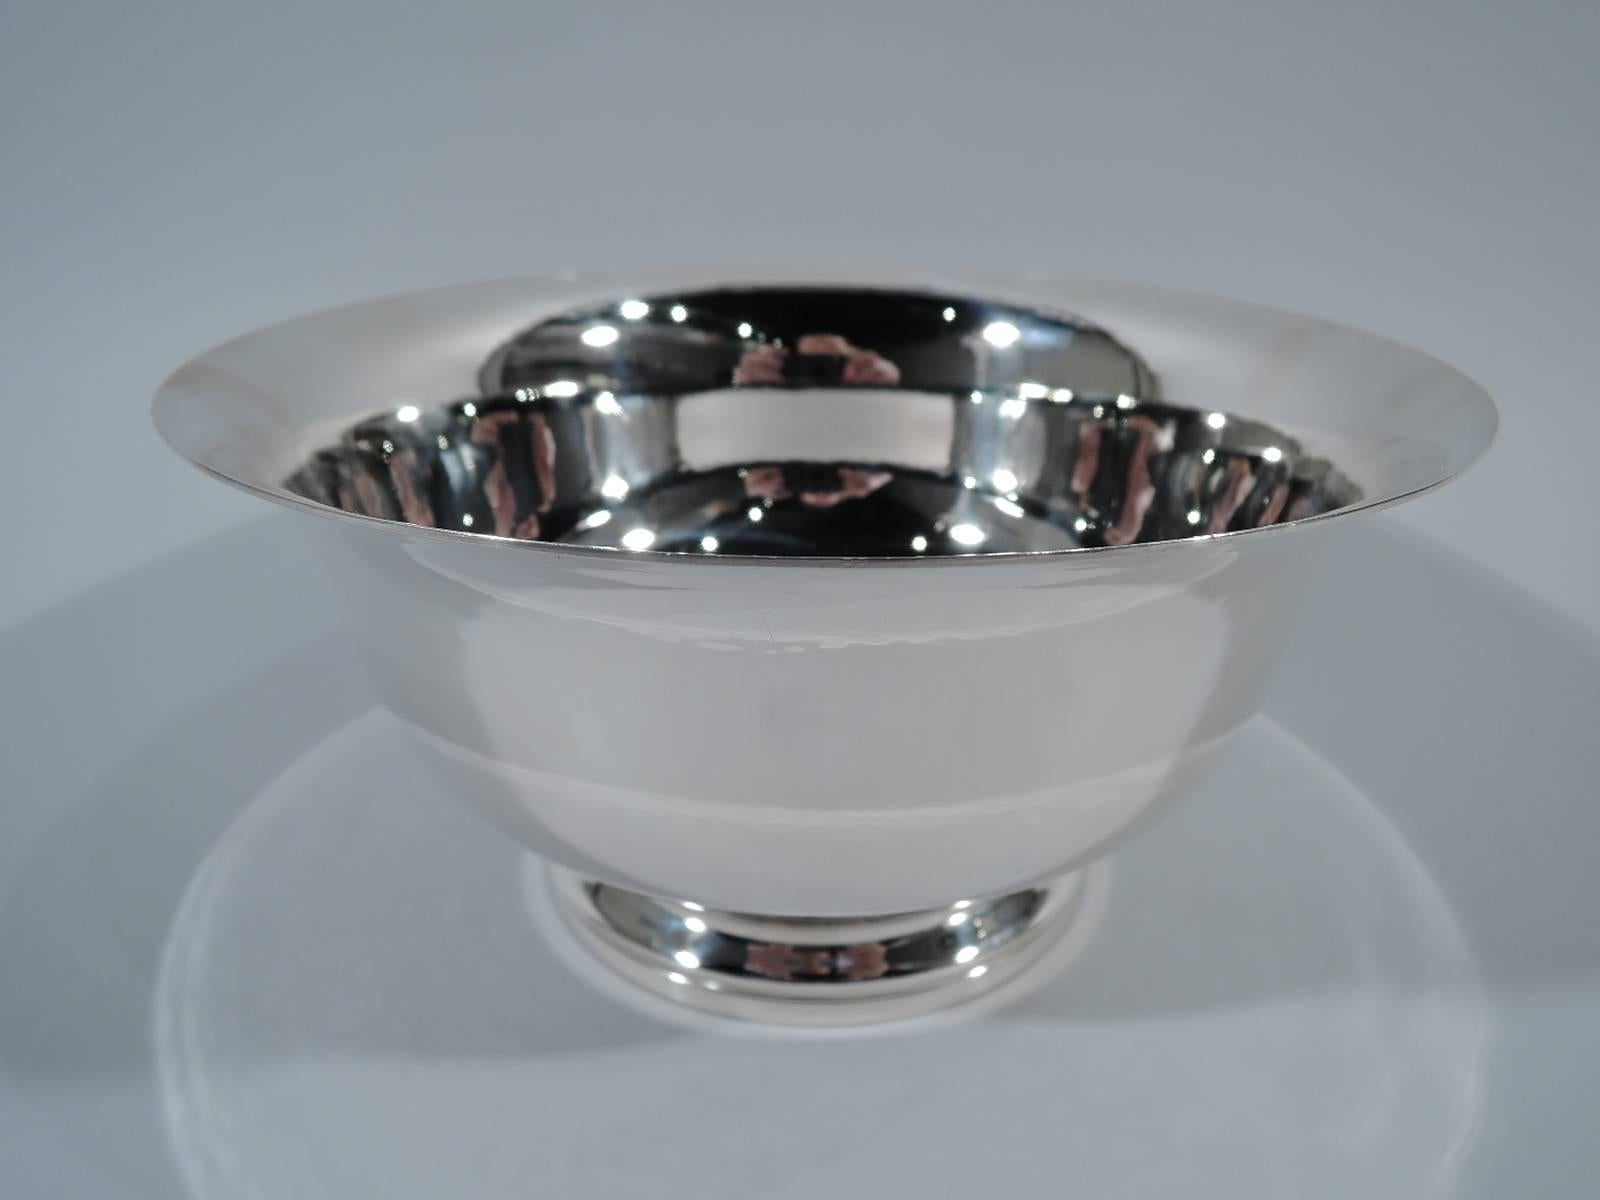 Hand-hammered sterling silver Revere bowl. Retailed by Georg Jensen Inc. USA in New York. Traditional form with curved sides, flared rim, and stepped foot. Hallmarked by Worden-Munnis, a Boston maker that was founded in 1940 and specialized in